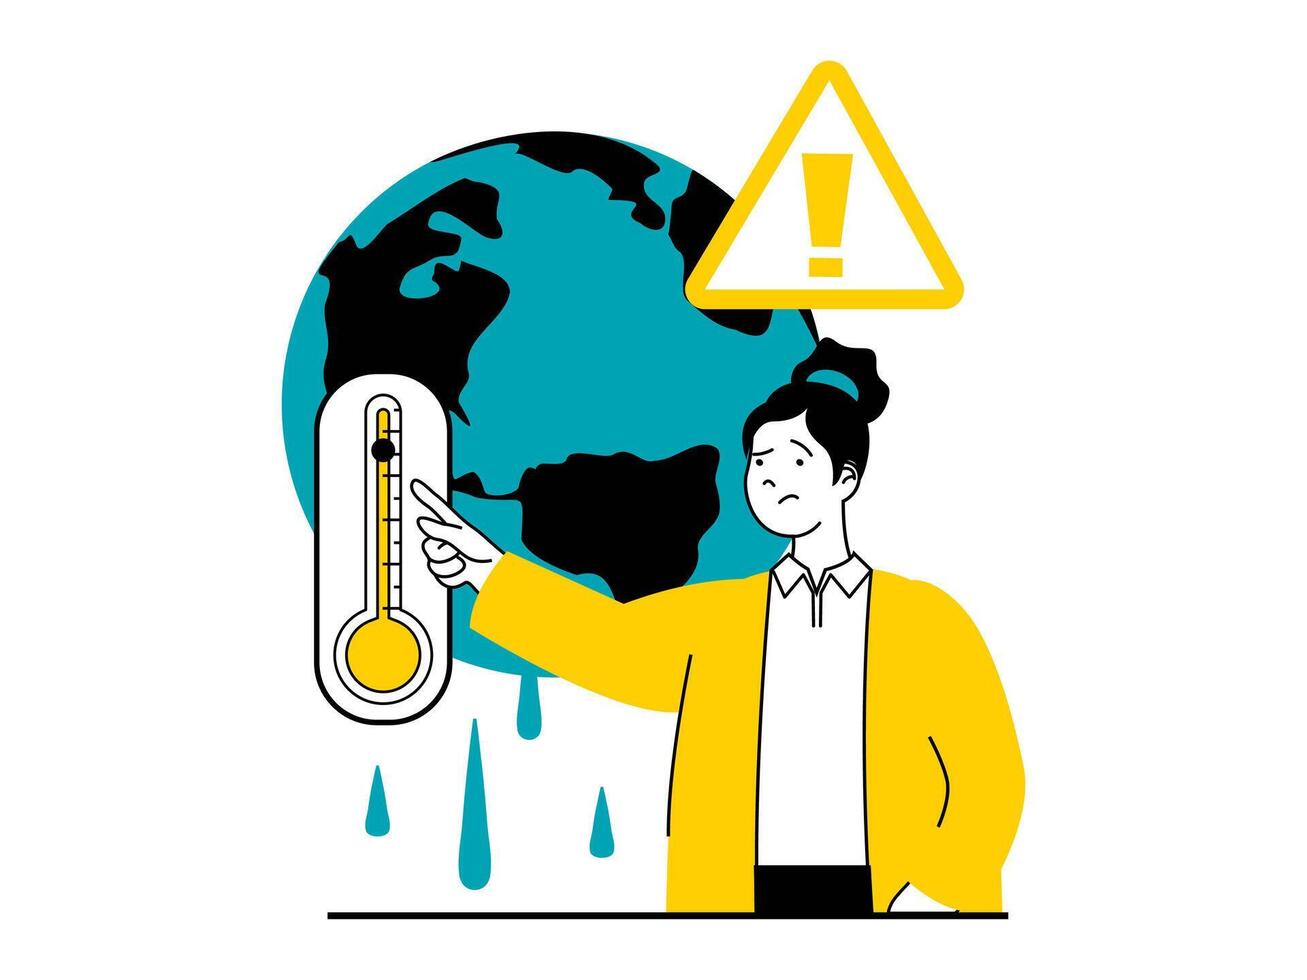 Save Earth concept with character situation. Eco activist woman pointing at thermometer with high temperature, warming and climate change. Vector illustration with people scene in flat design for web